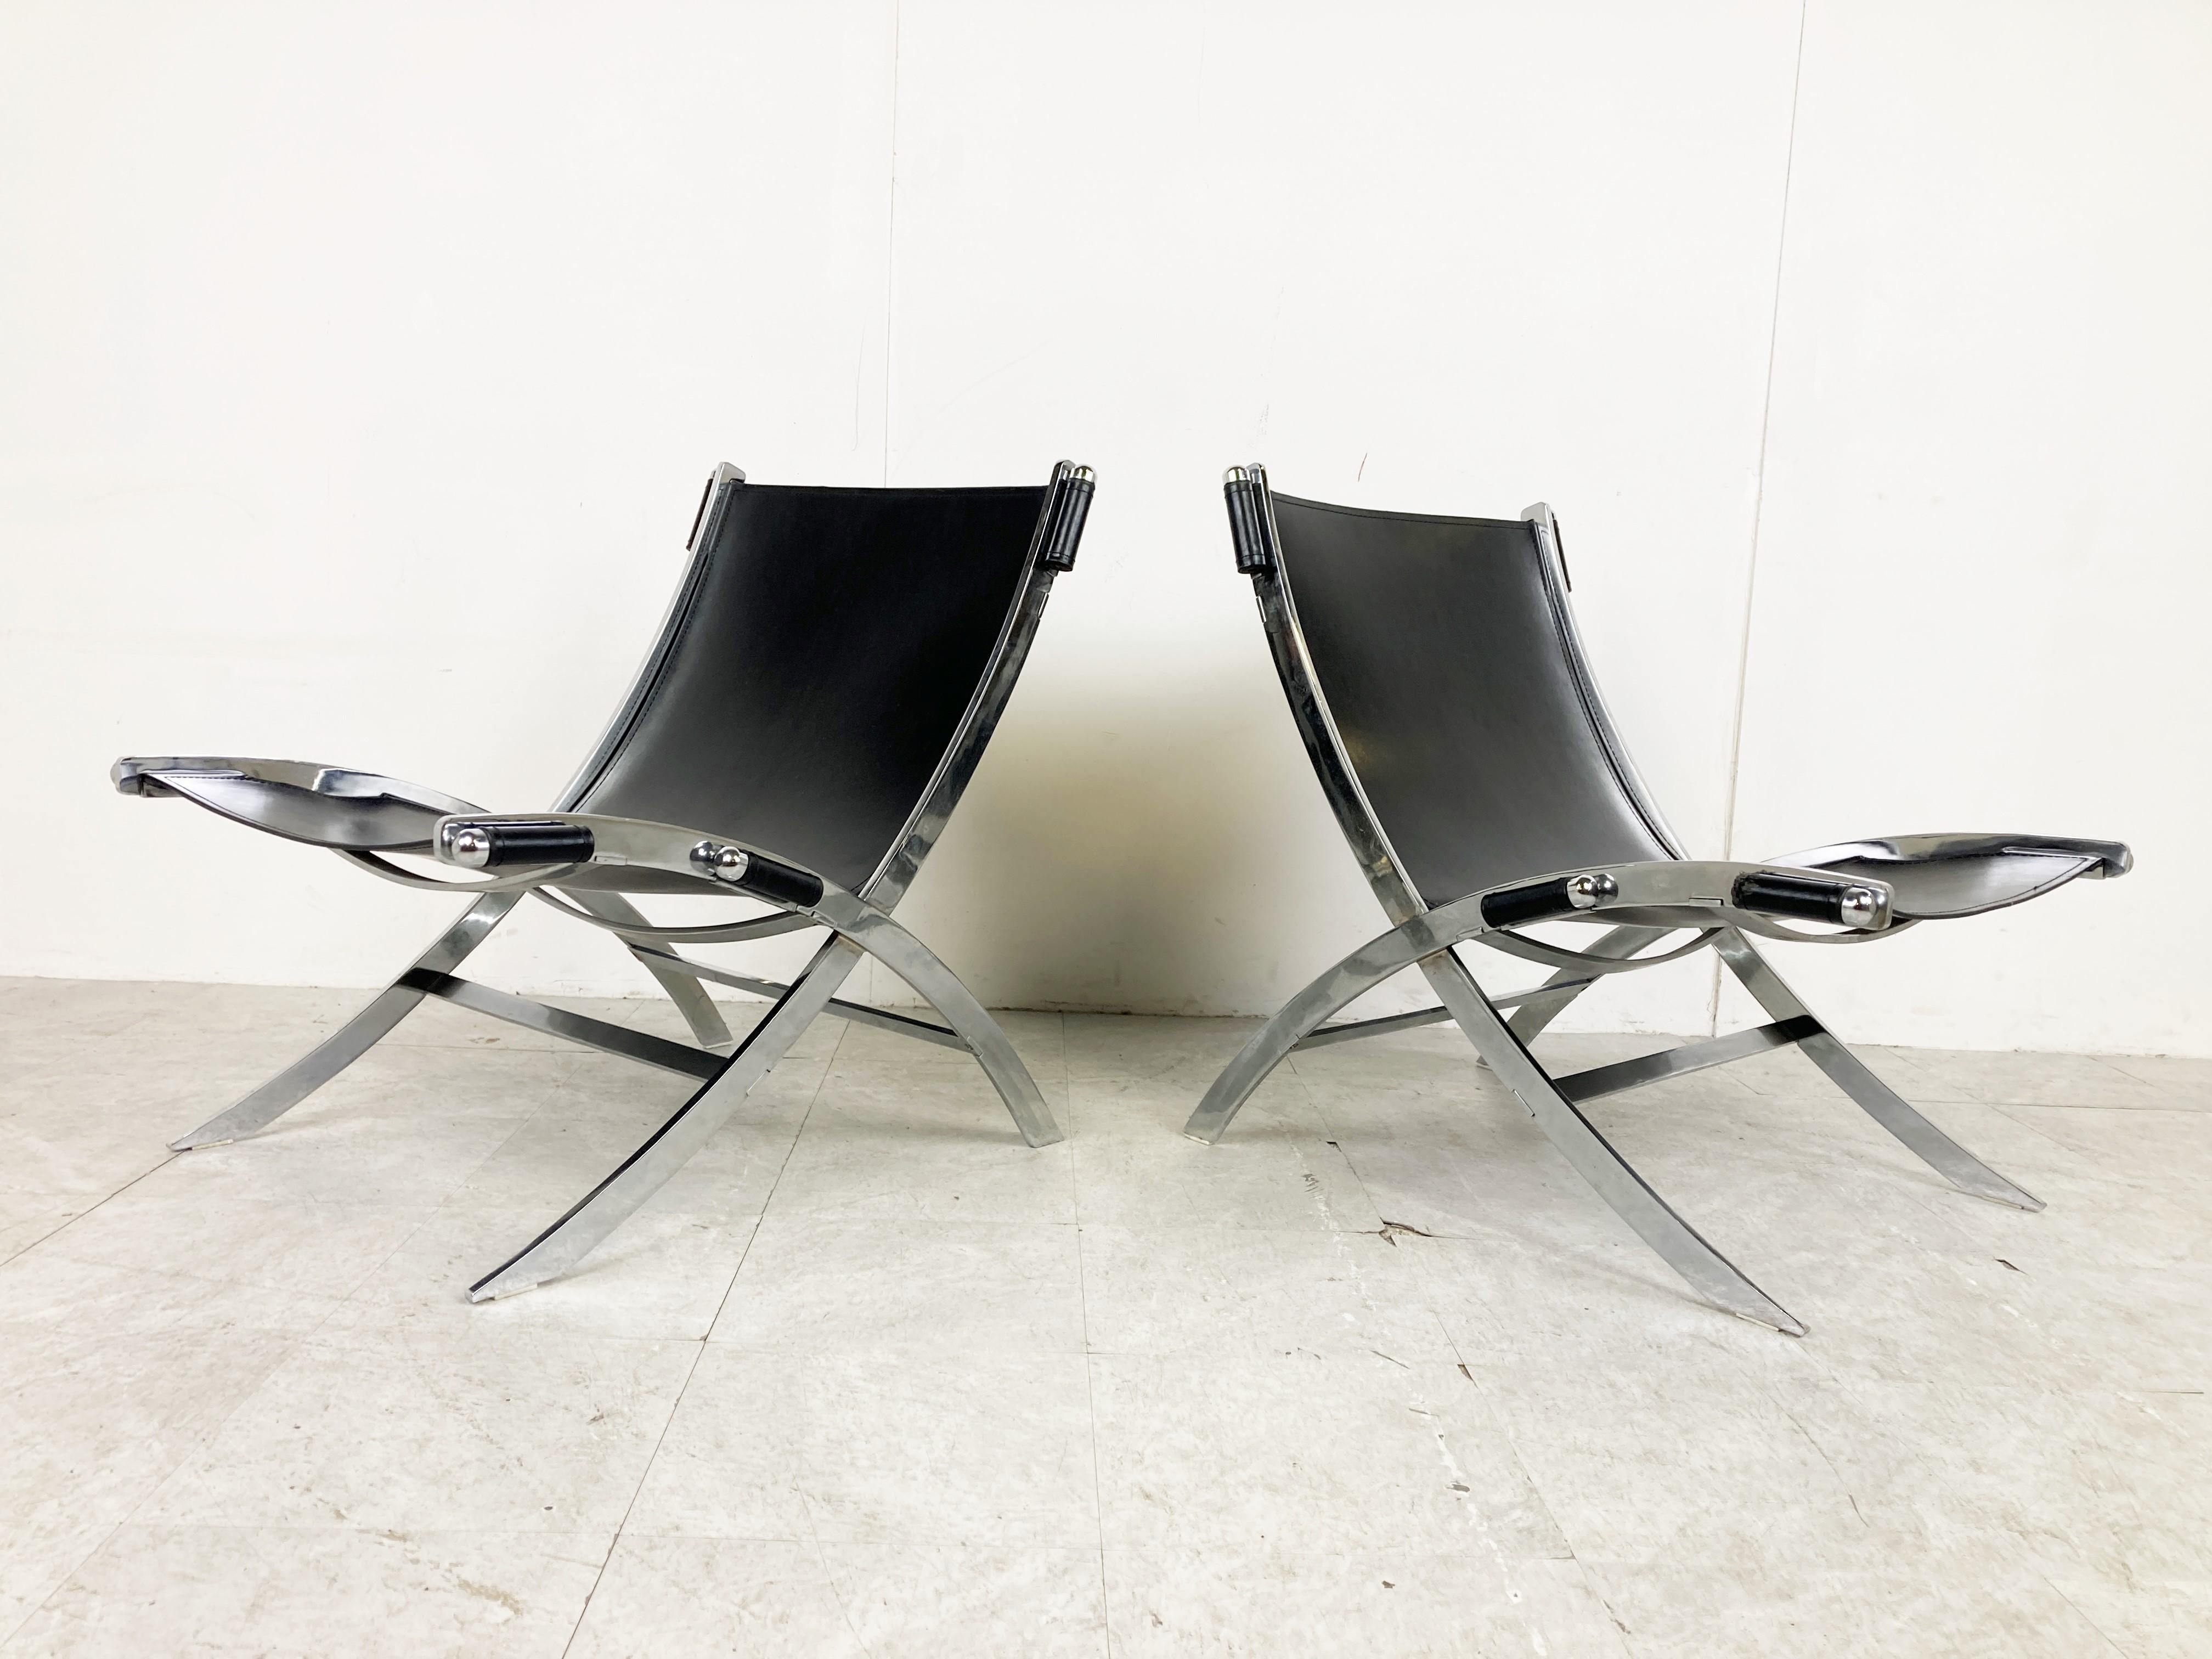 Pair of black leather lounge chairs designed by Paul Tuttle and Antonio Citterio and produced by Flexform in the 1980s.

Elegant scissor shaped chromed steel based and sling leather seats/backrests.

Good overall condition with normal age